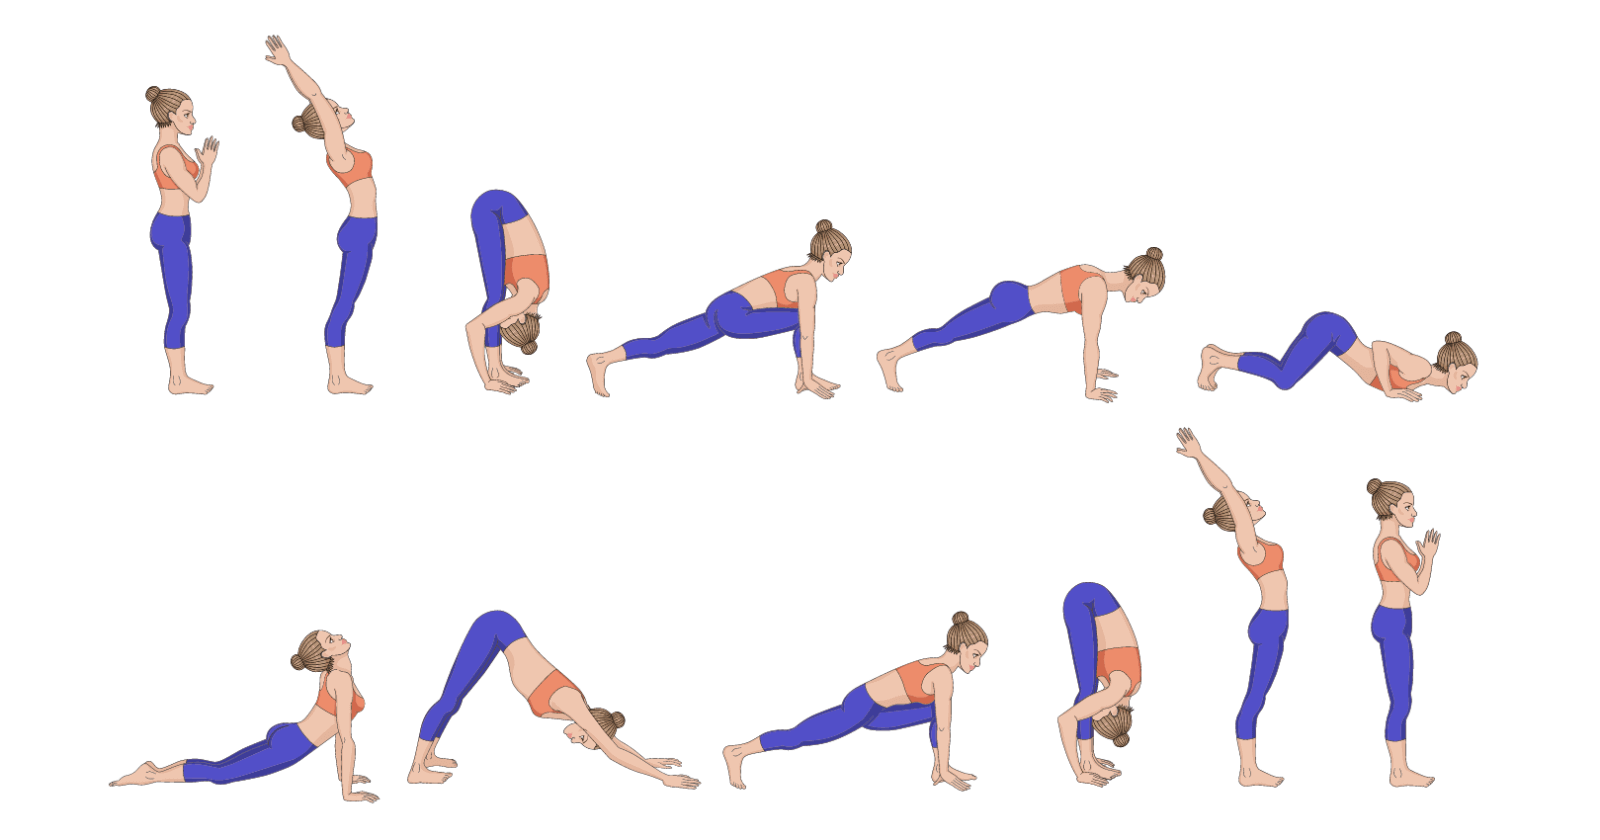 Halasana: Try Plough Pose To Stimulate Thyroid Function And Abdominal  Organs; Here's A Step-By-Step Guide